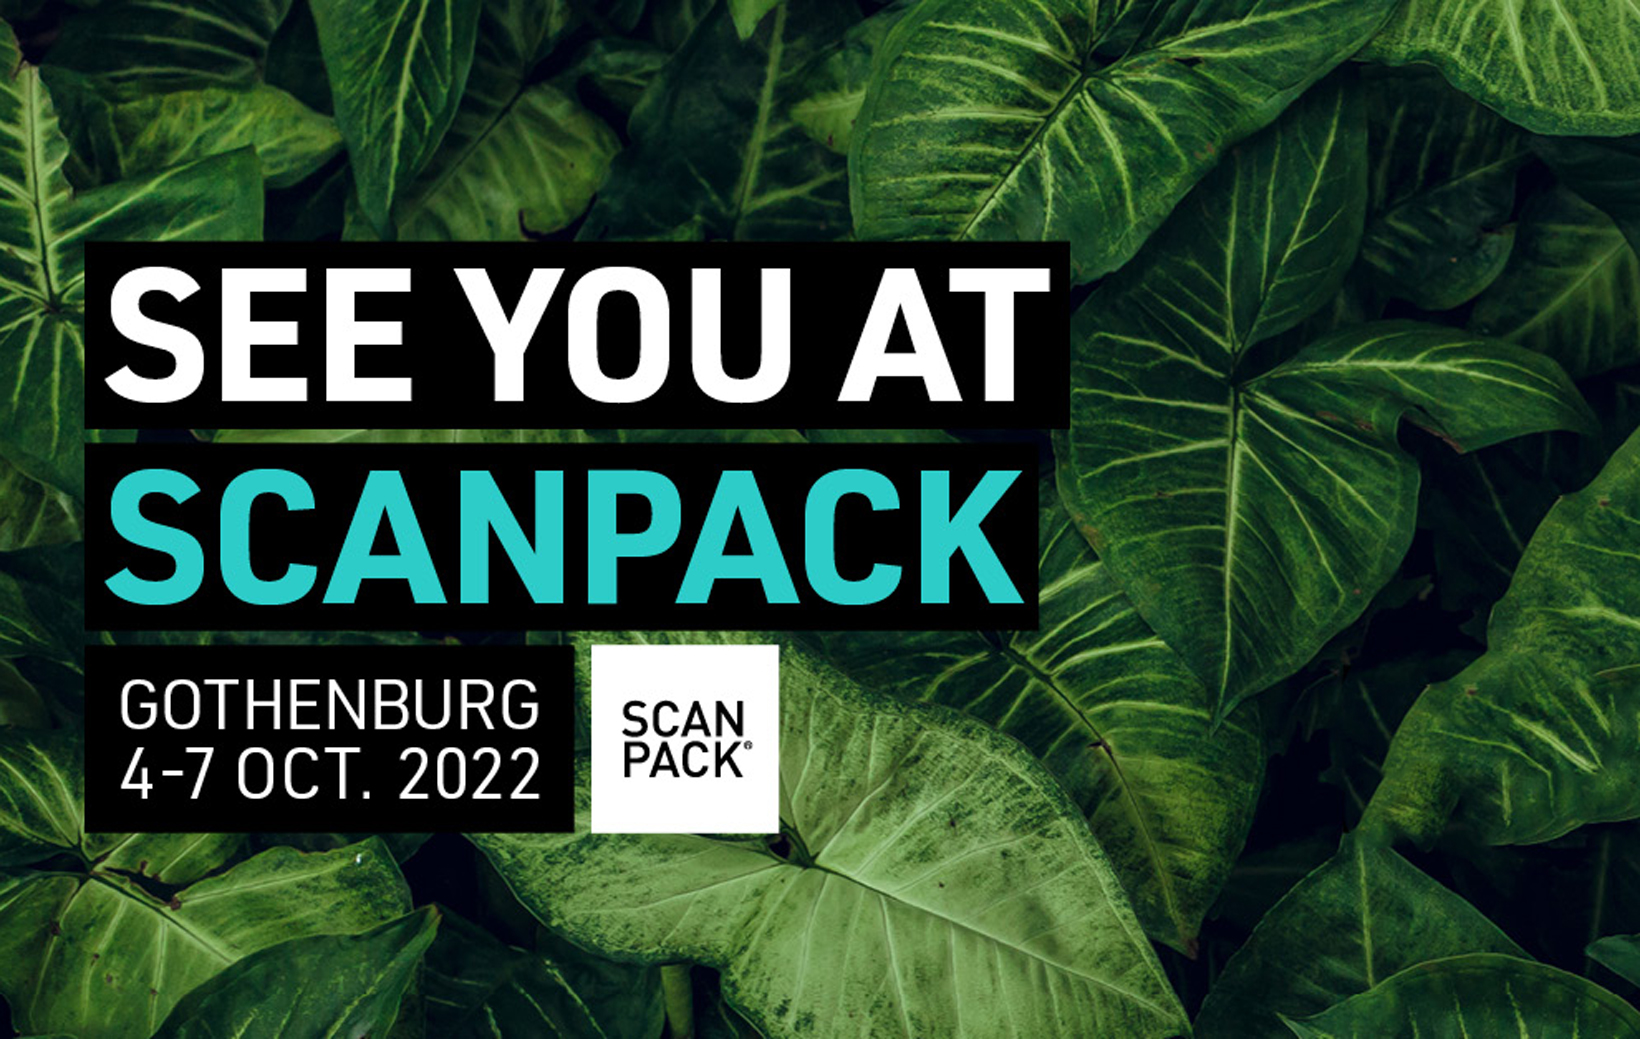 Meet Schur at Scanpack from 4th to 7th October